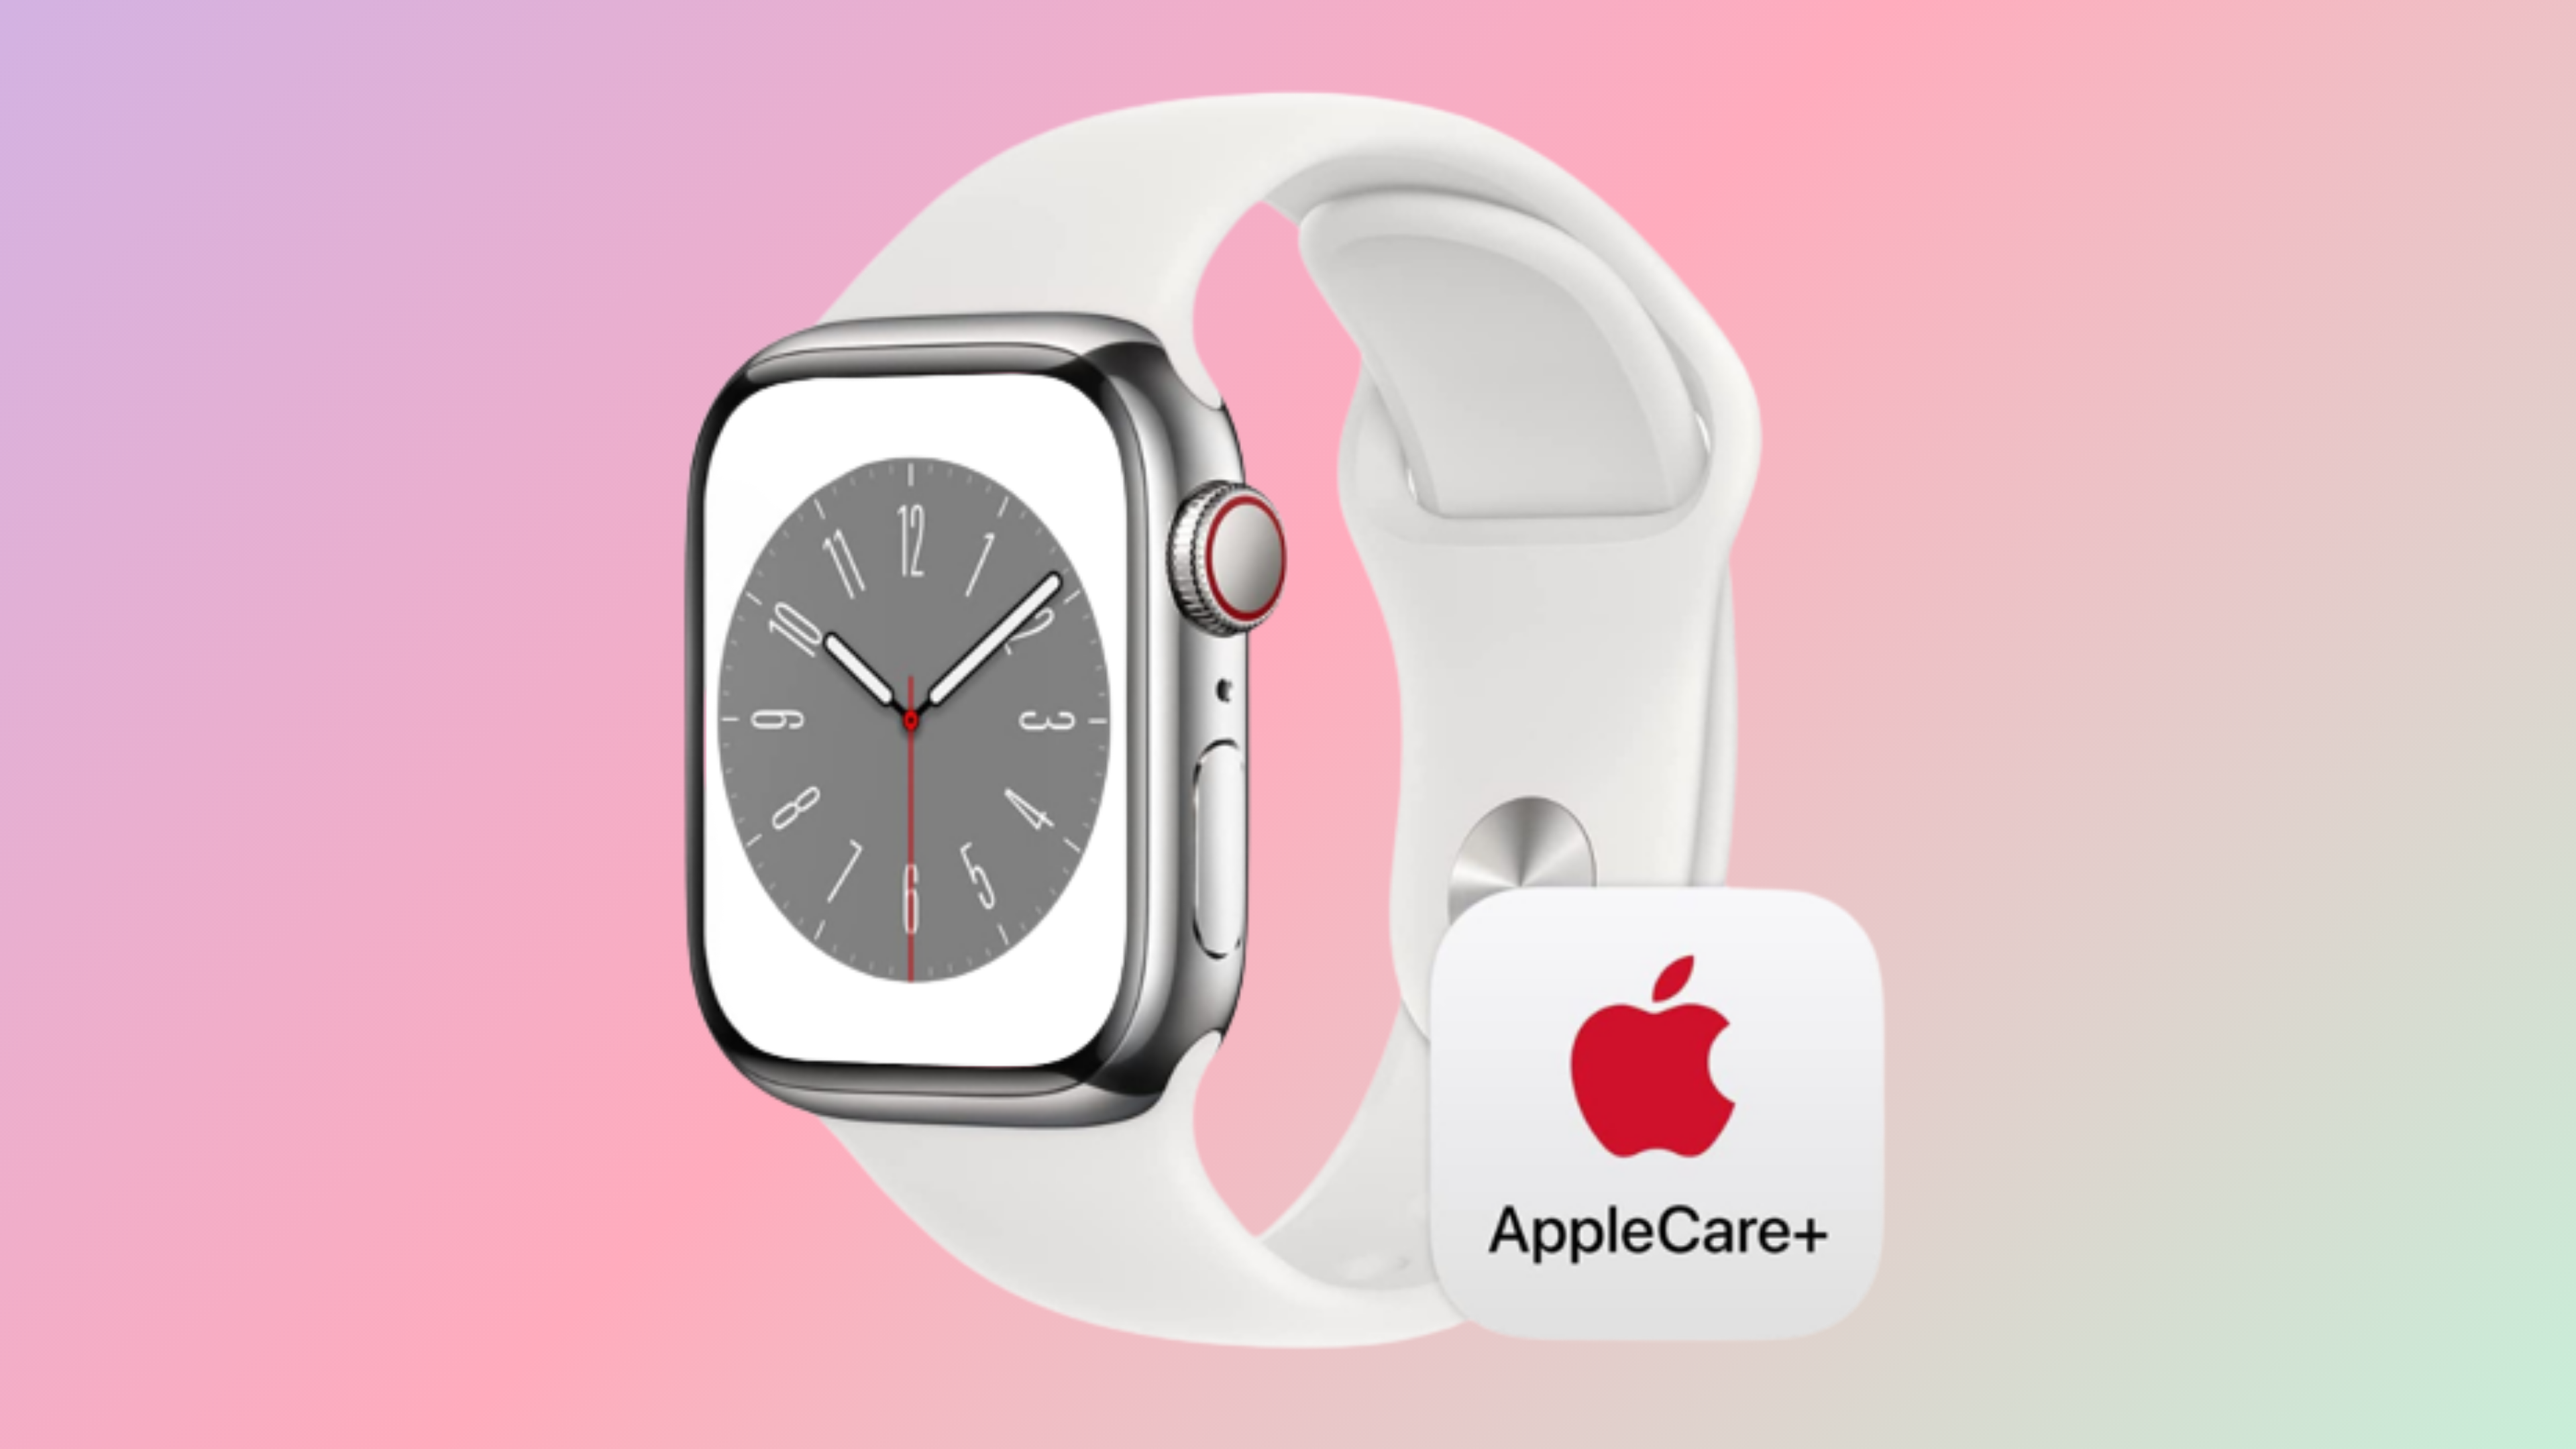 Apple Watch Series 8 Stainless Steel with AppleCare+ logo on gradient background